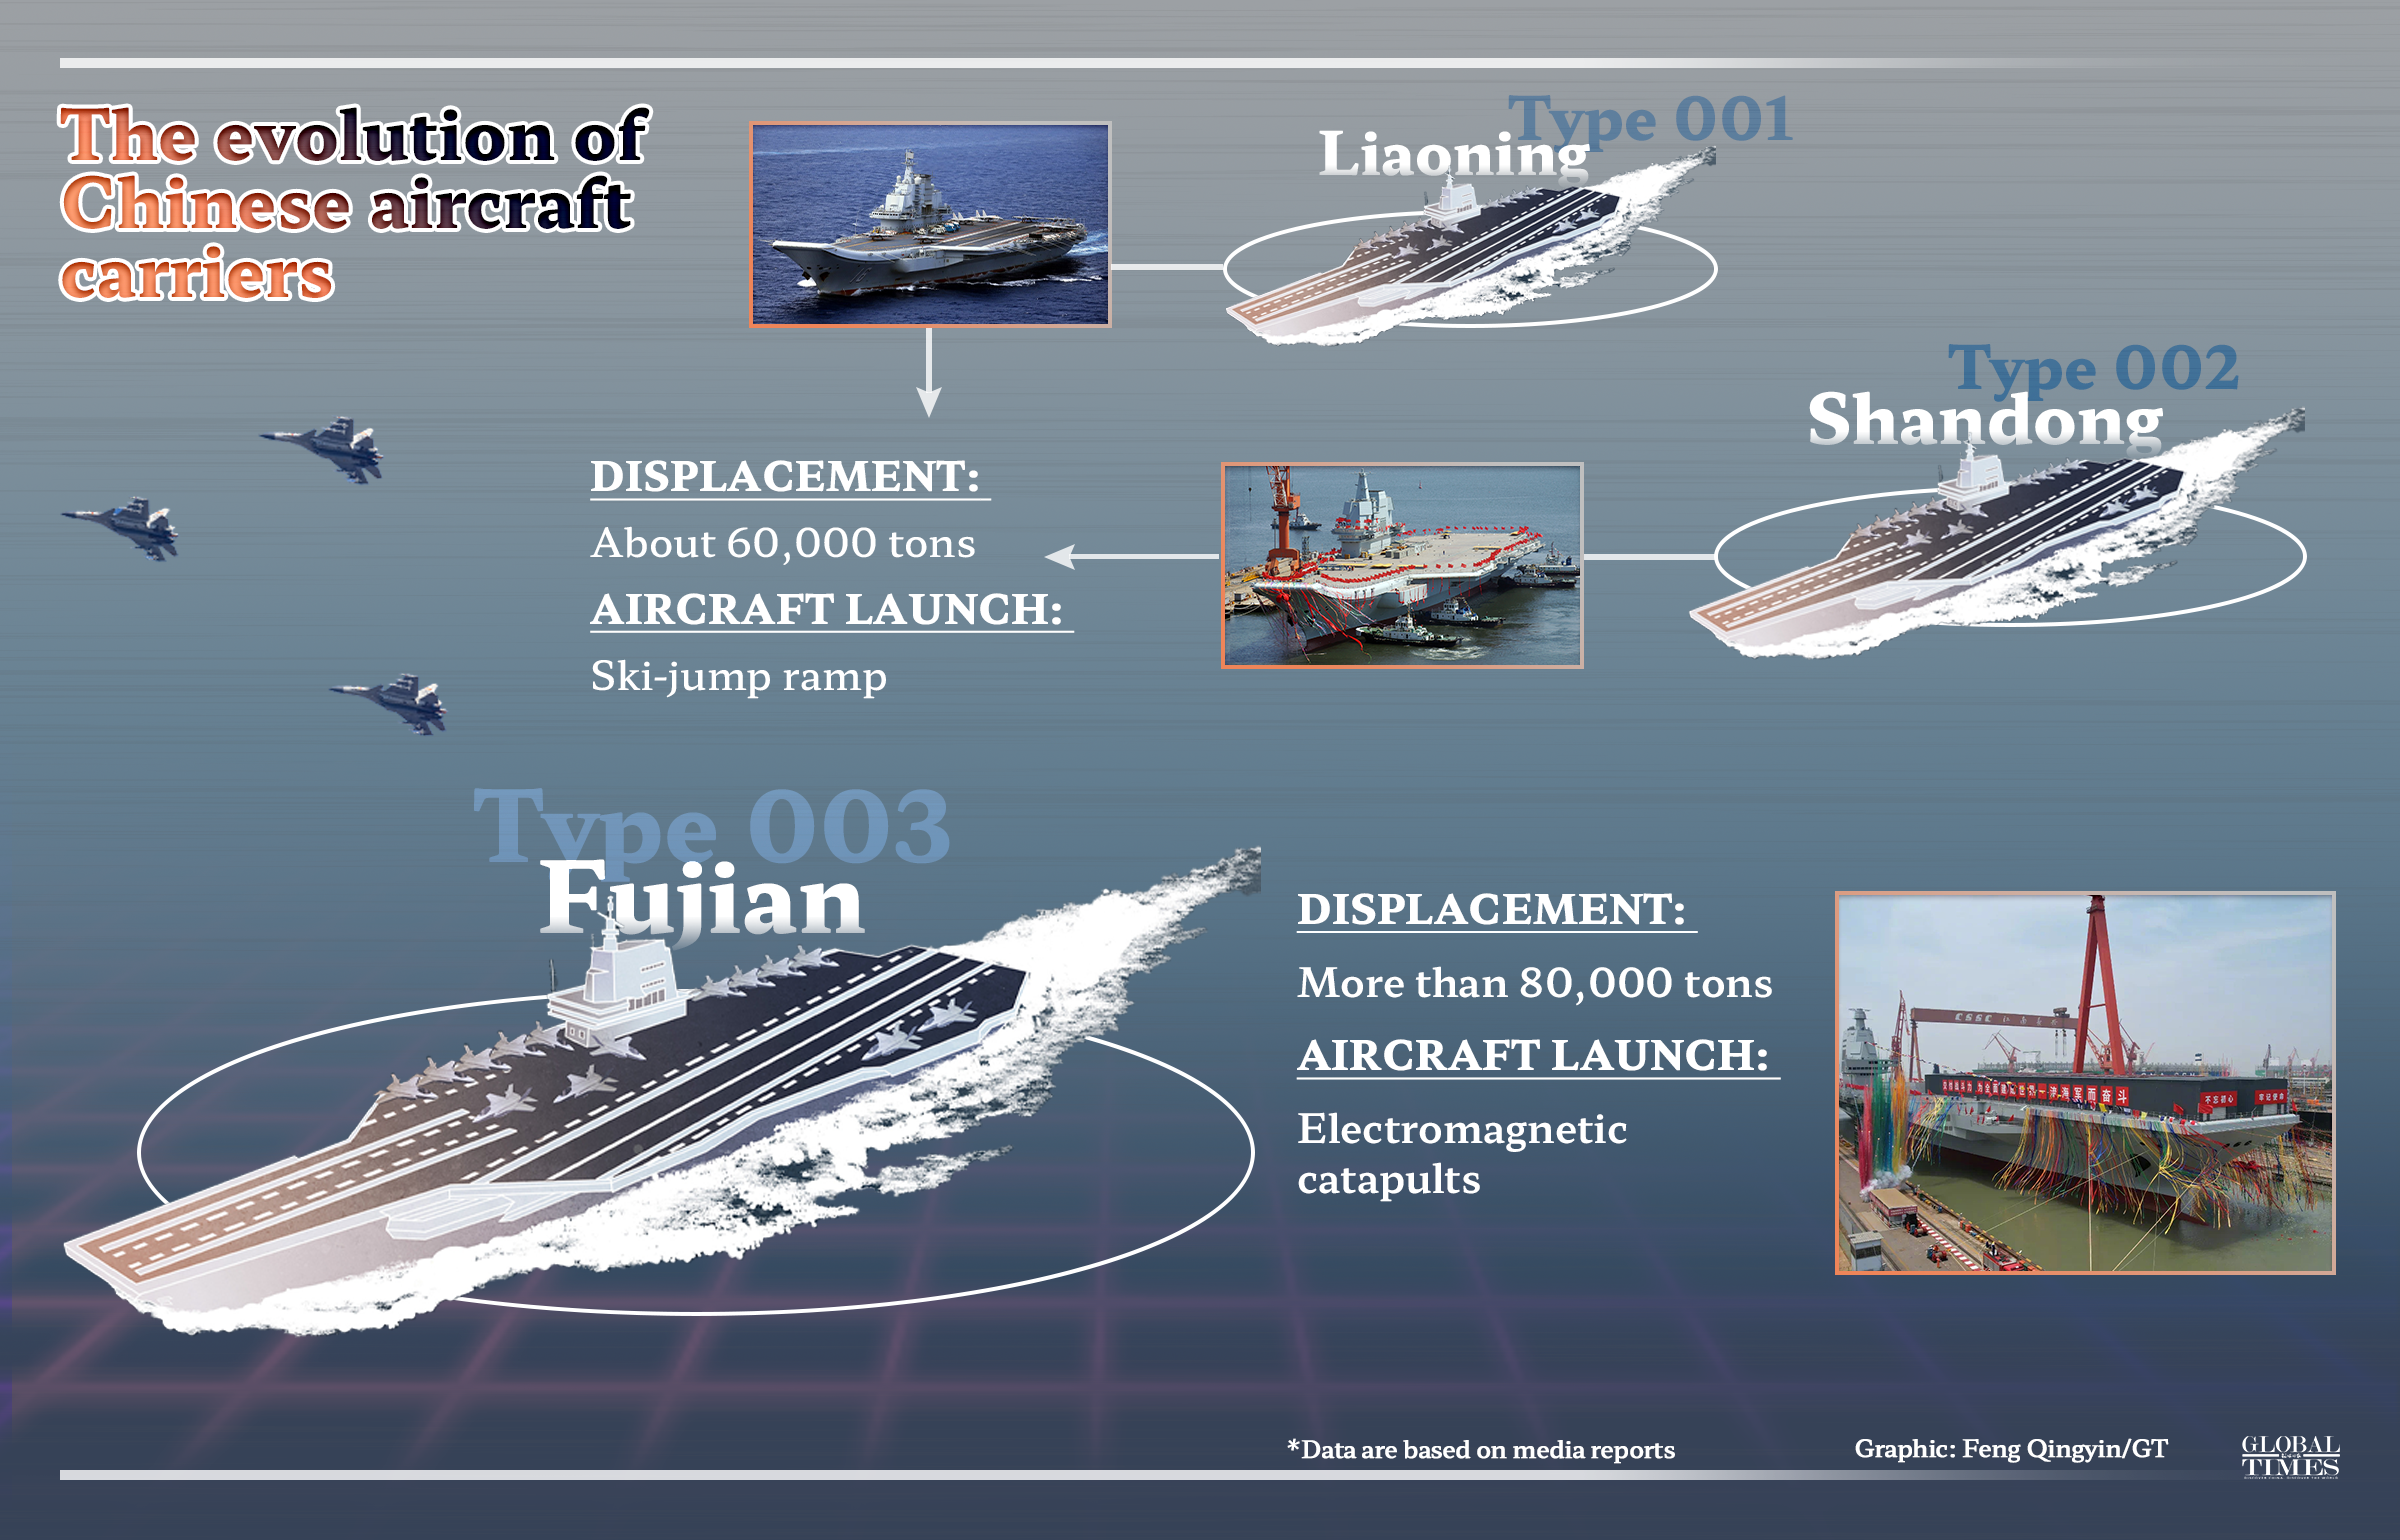 The evolution of Chinese aircraft carriers Graphic: Feng Qingyin/GT